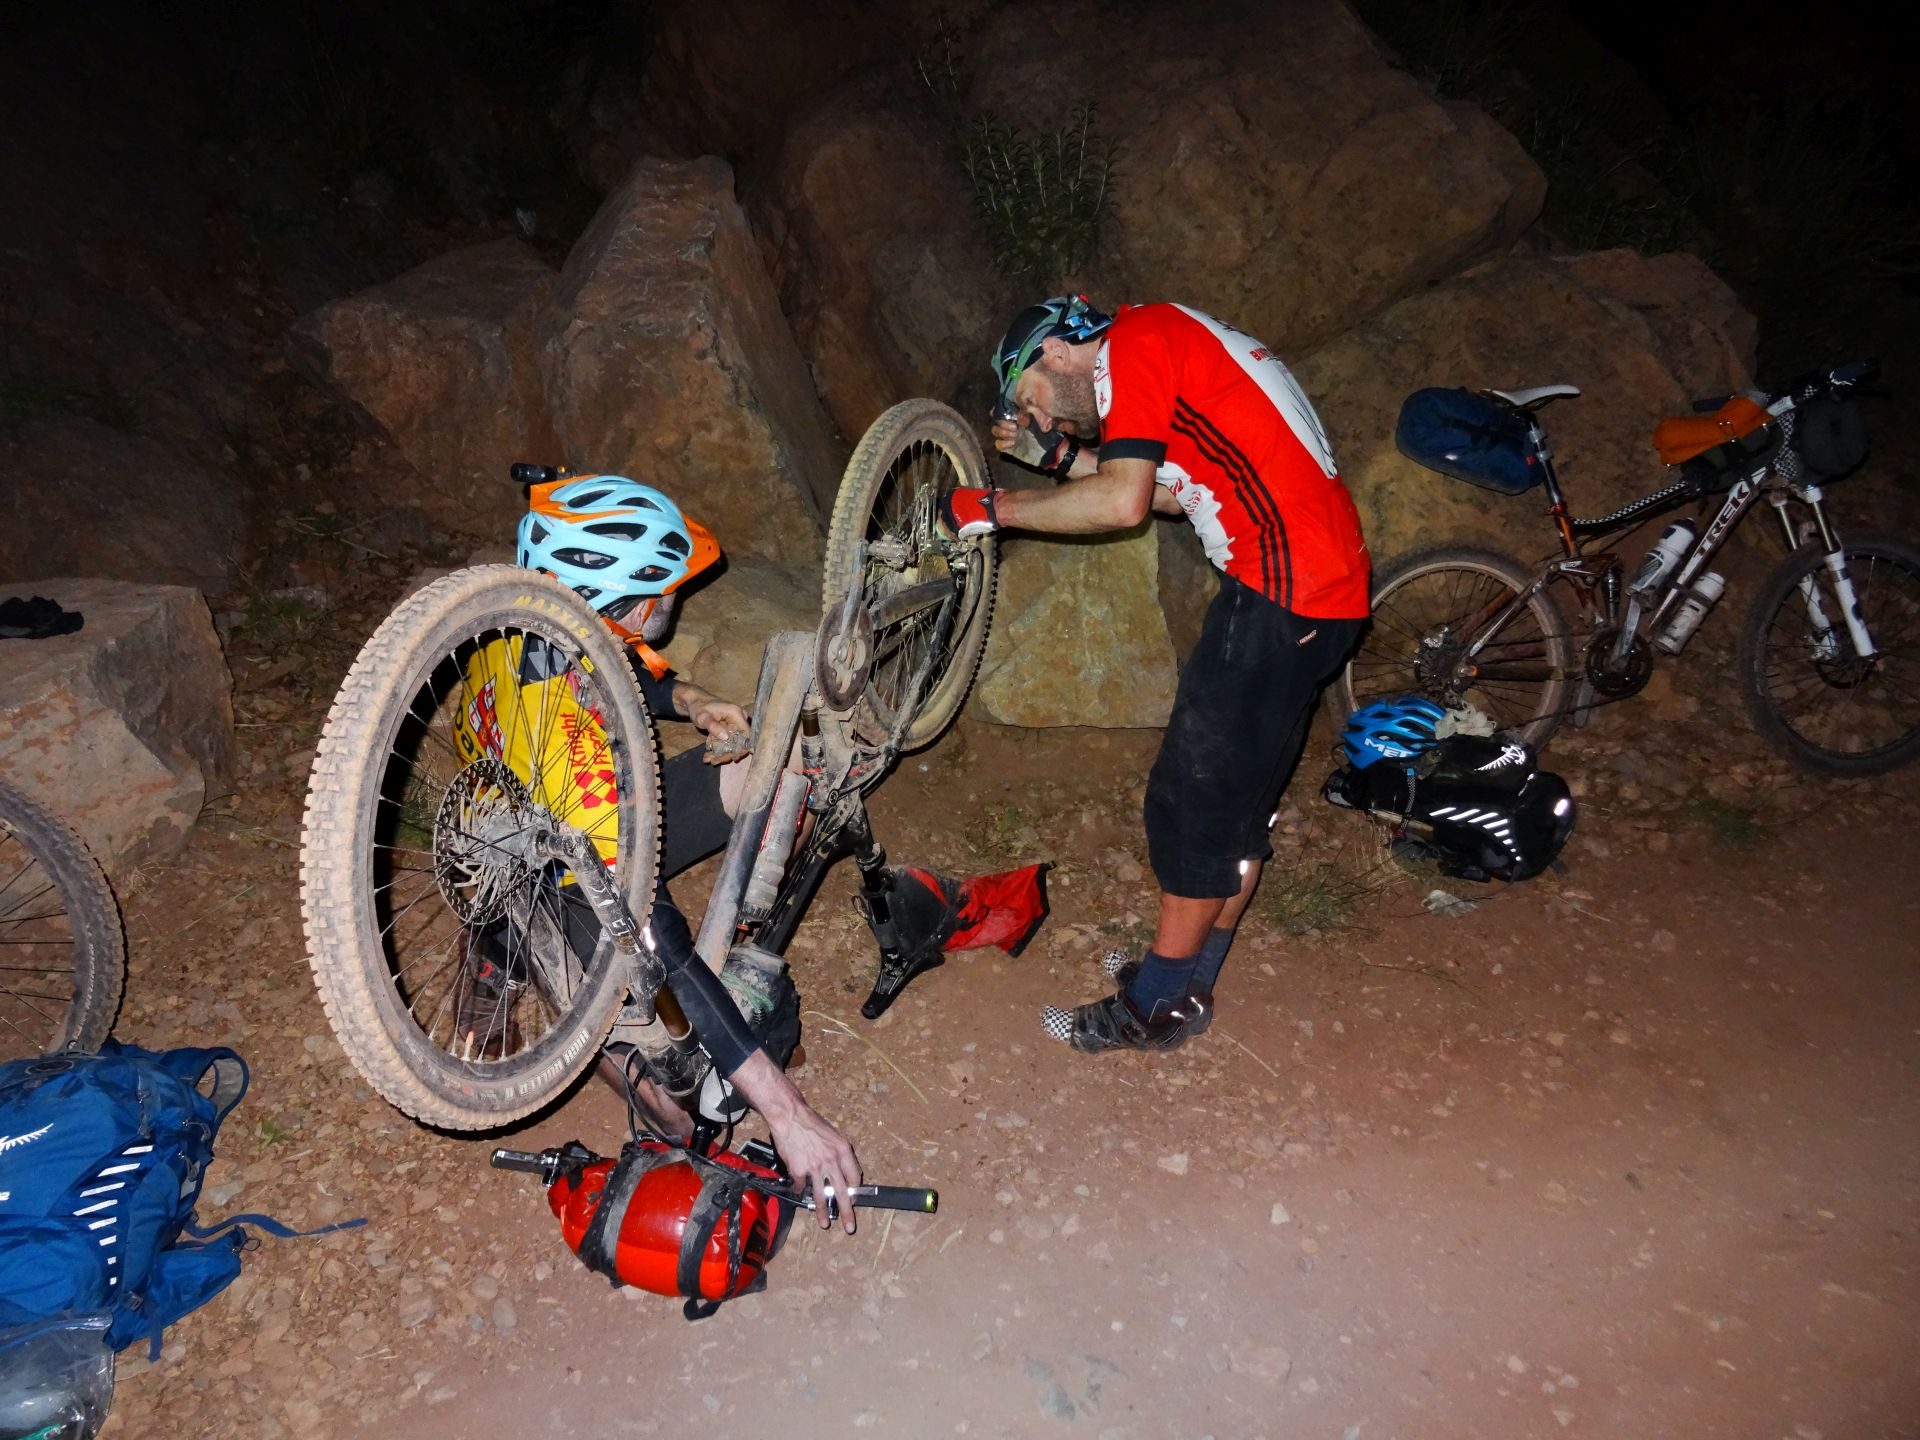 Day 6 - Repairing a snapped-off rear derailleur in the dark, after nearly 14 hours on the bikes. "Can we fix it? ... Yes we can!". Shaun AKA Bob the Builder master-mechanic does the final checks ... Somewhere between Tighza & Anguelz! © Steve Woodward